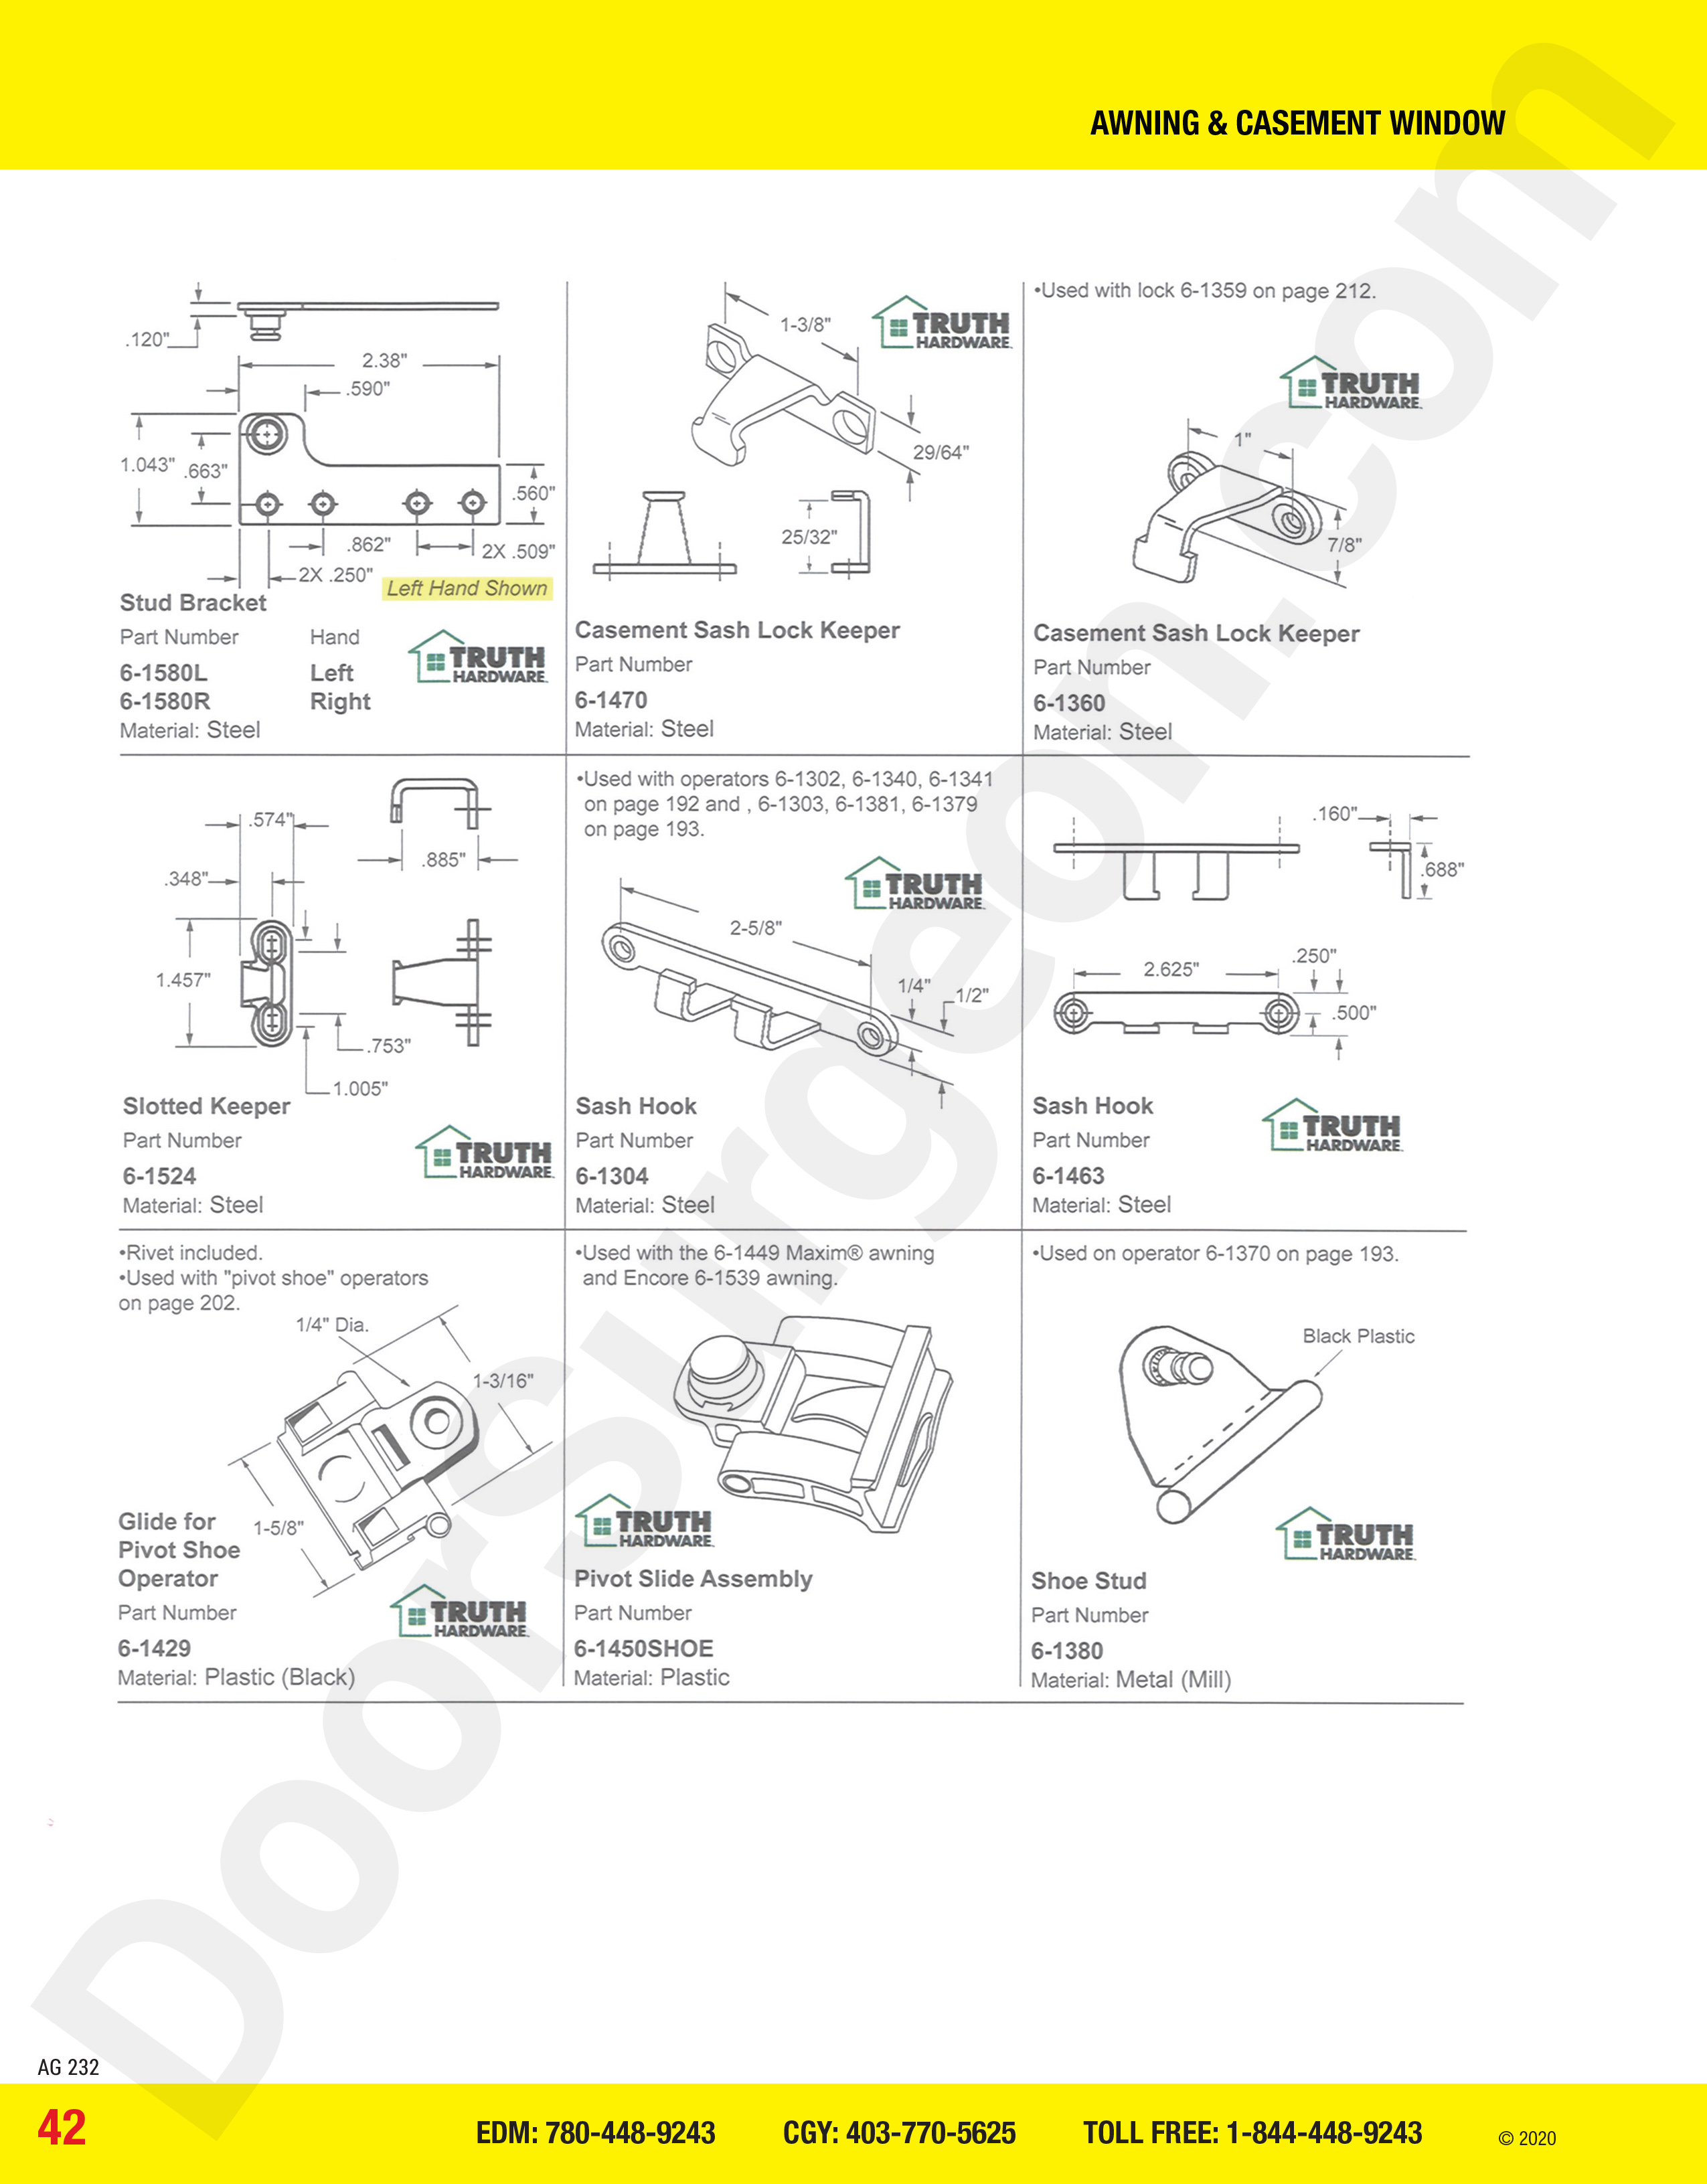 awning and casement window parts for truth hardware keepers